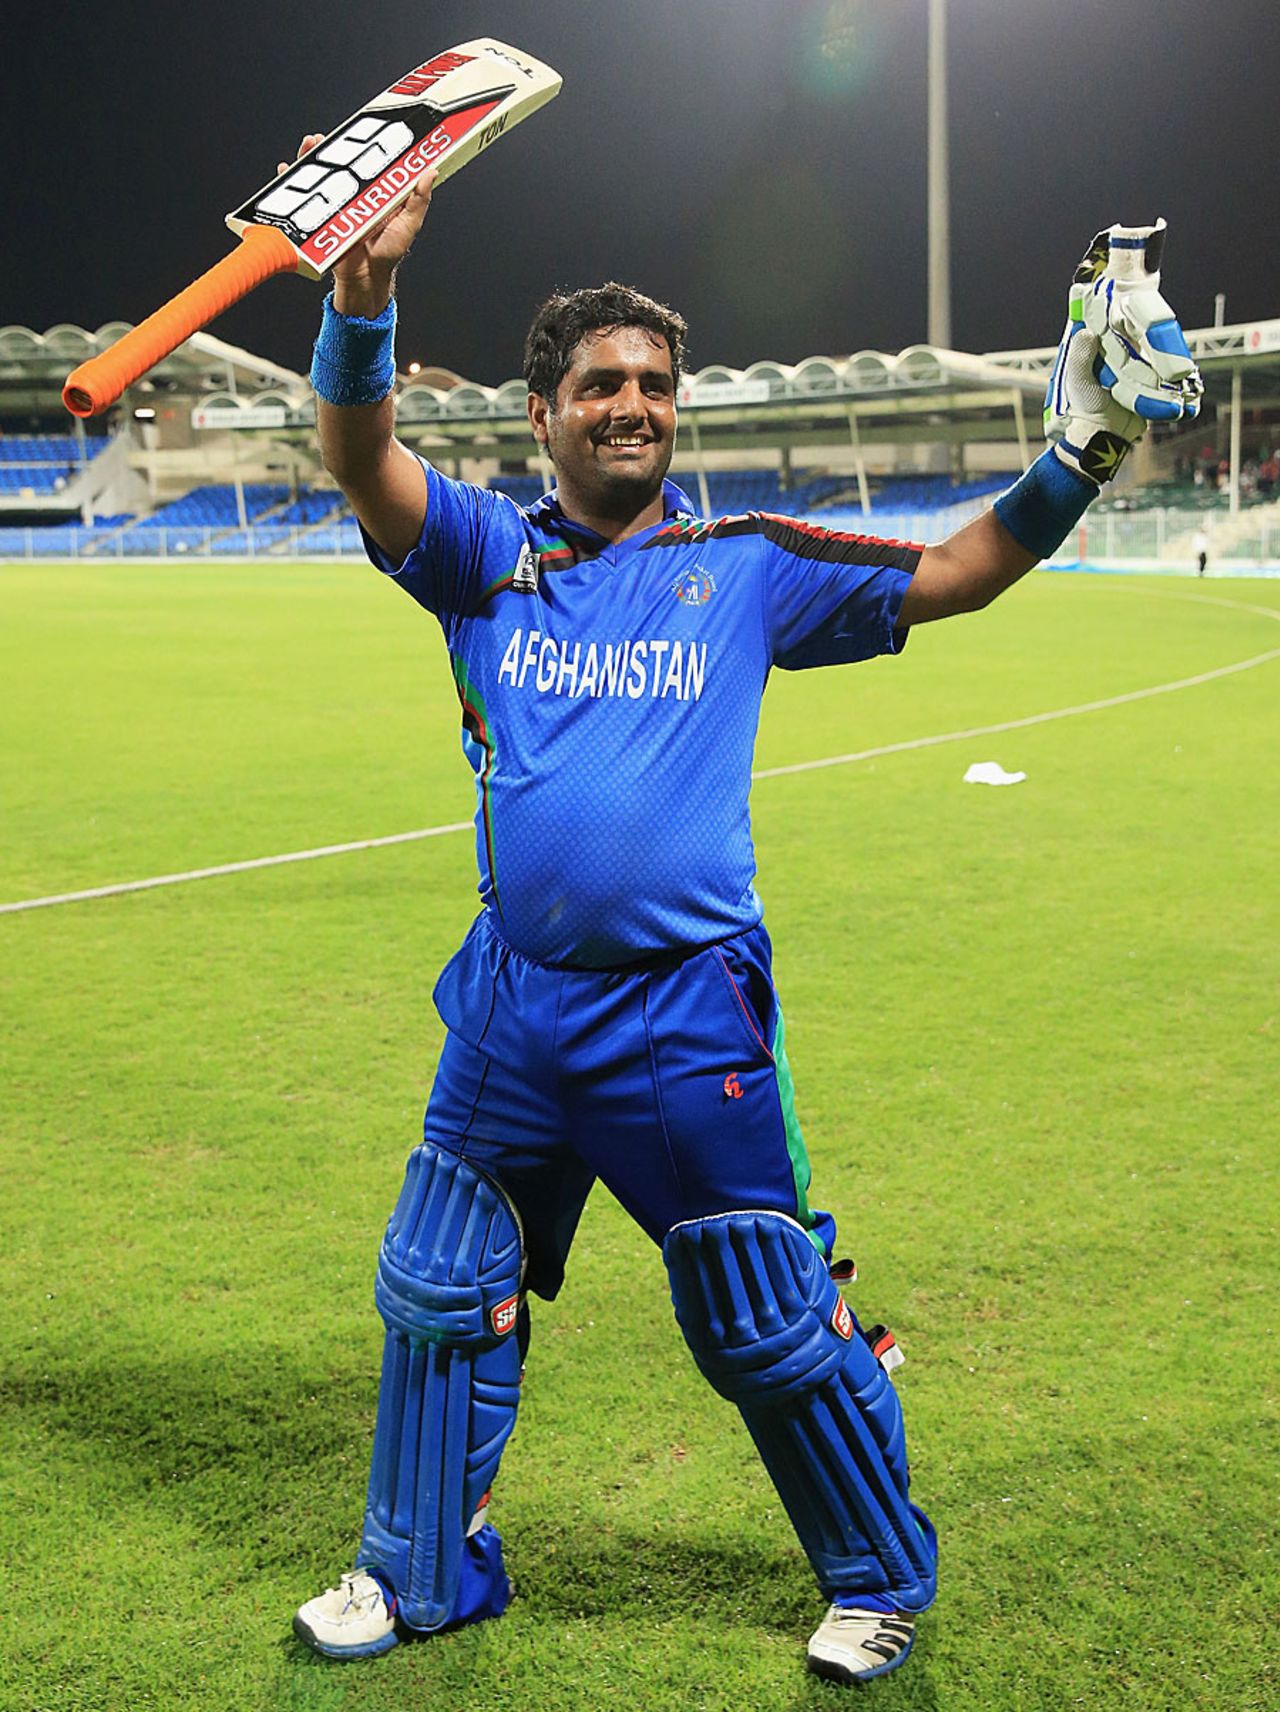 Mohammad Shahzad smashed an unbeaten 43 to guide Afghanistan to victory, Afghanistan v Nepal, ICC World Twenty20 Qualifiers, Group B, Sharjah, November 22, 2013